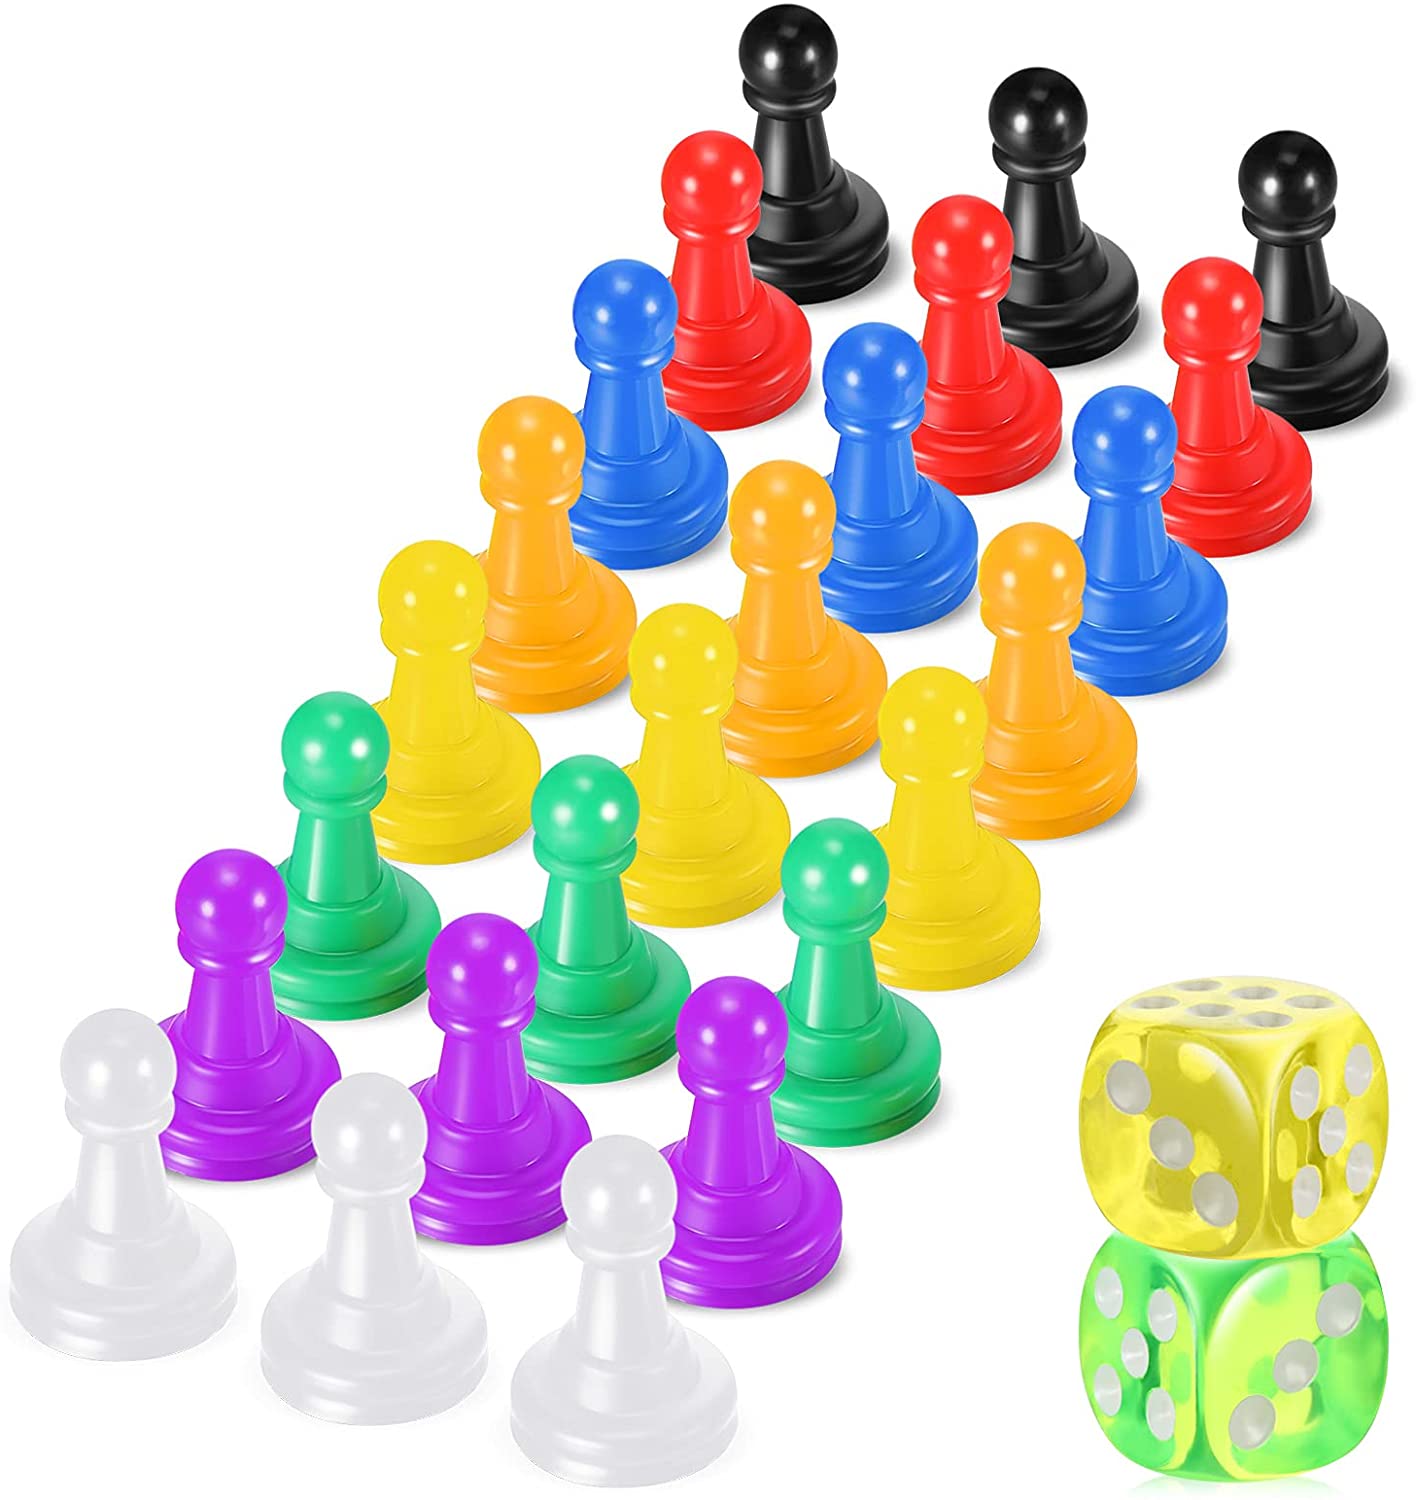 24 of 6 60 Standard Board Game Pawns / Pieces NEW Qtys 12 6 Colors 